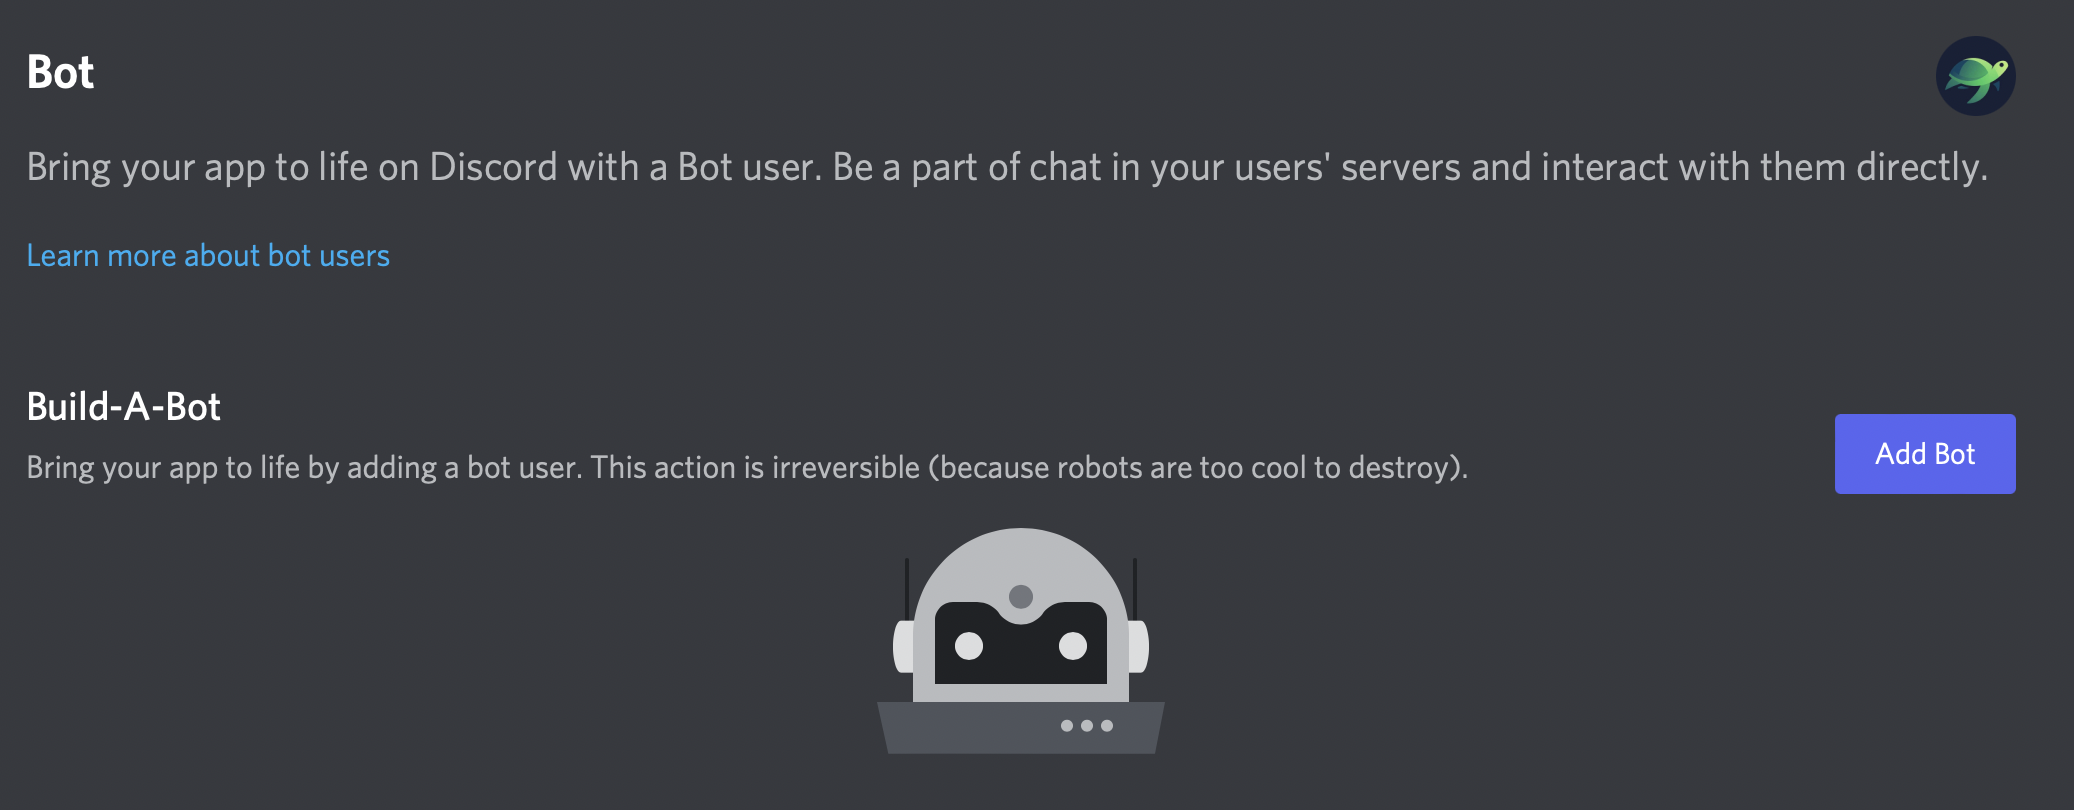 The bot